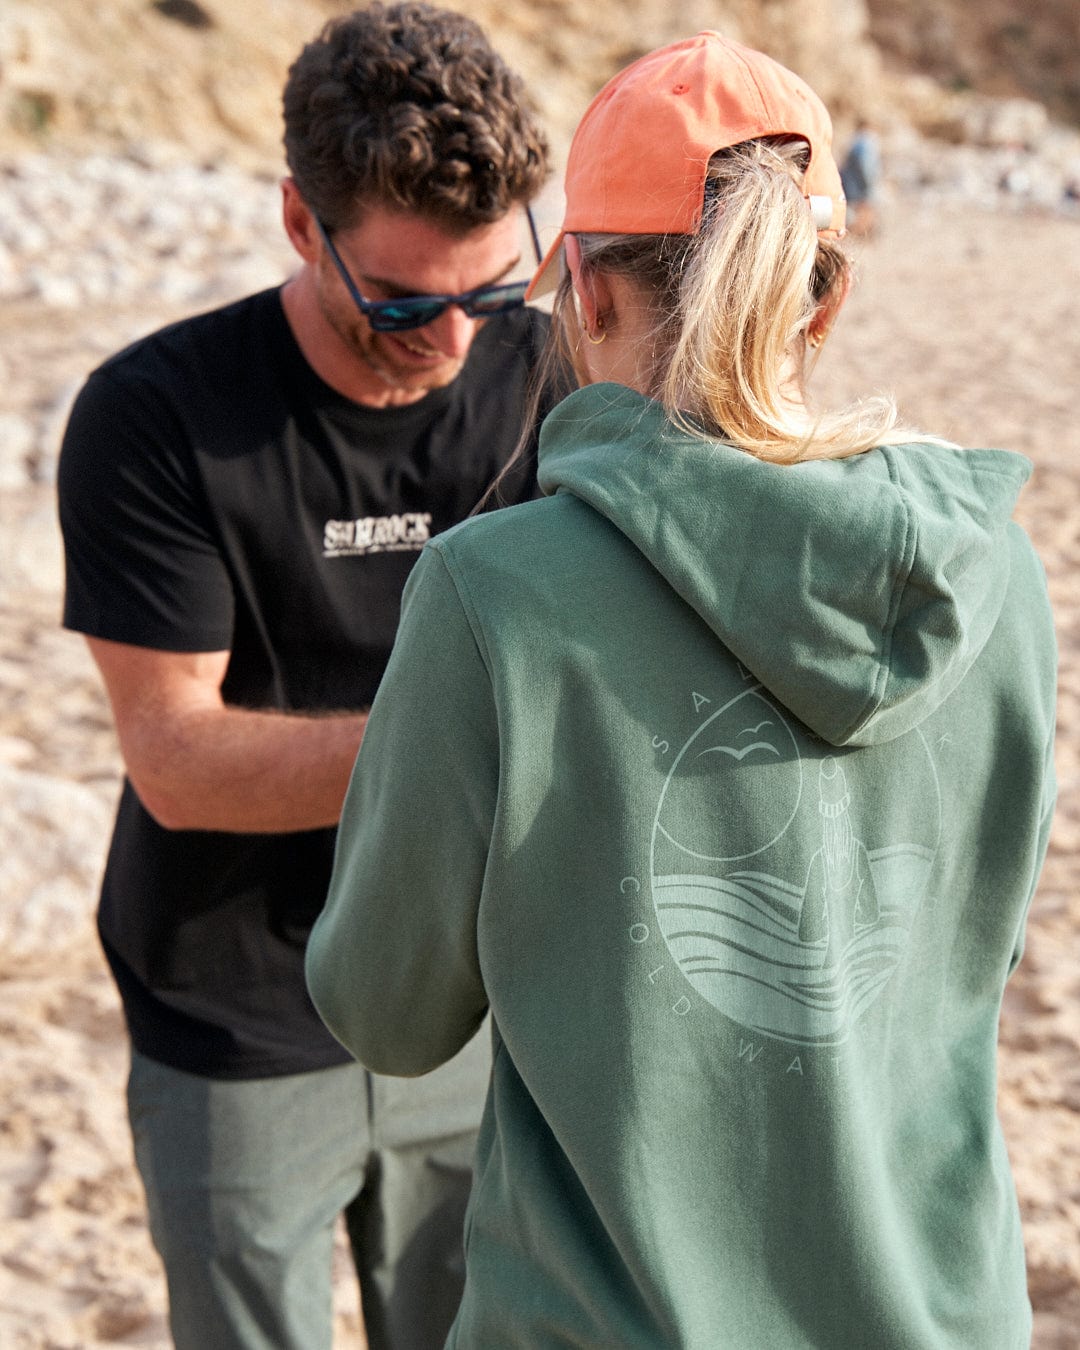 Two people in casual attire talking on a sandy beach, with one person seen from the back wearing a green hoodie and the other in a black Saltrock 100% Cotton t-shirt.